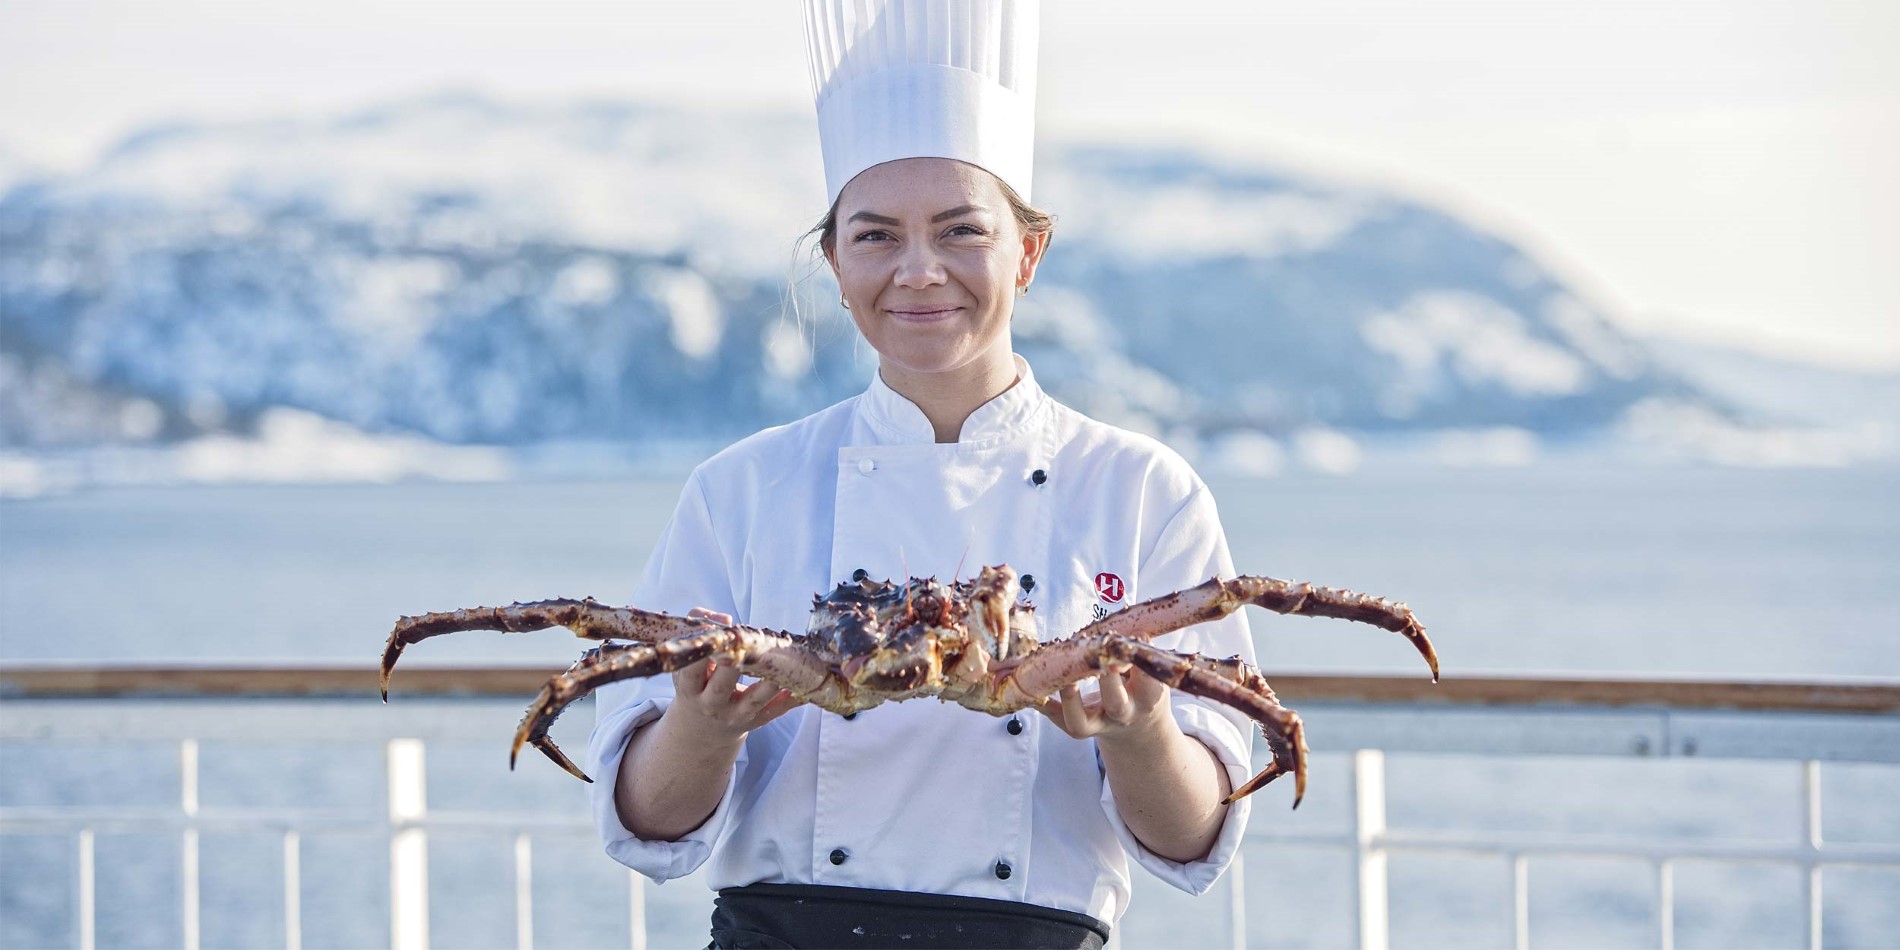 One of our chefs with the majestic king crab on deck